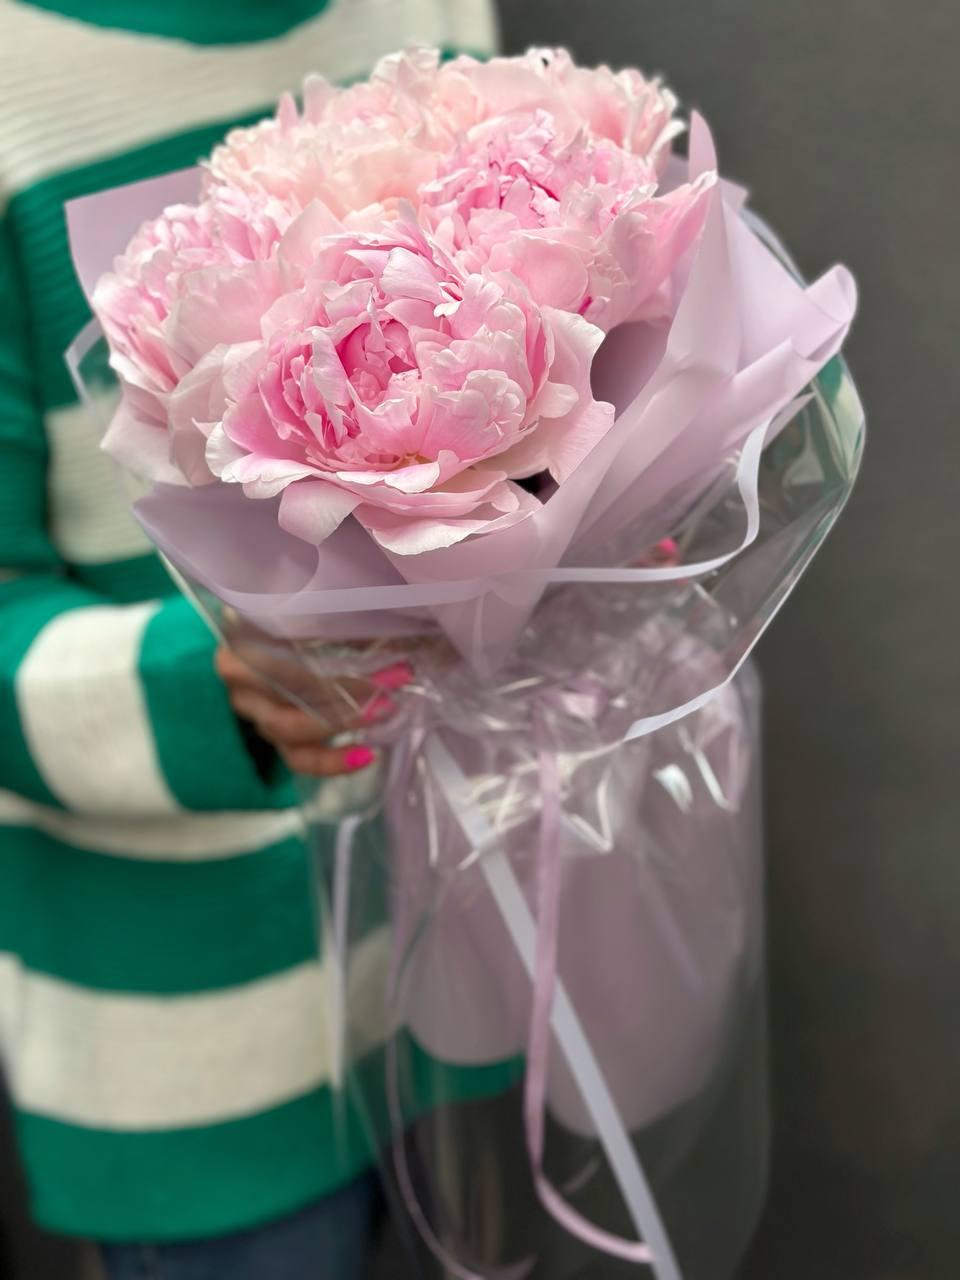 Bouquet of peonies "Marshmallow 5"